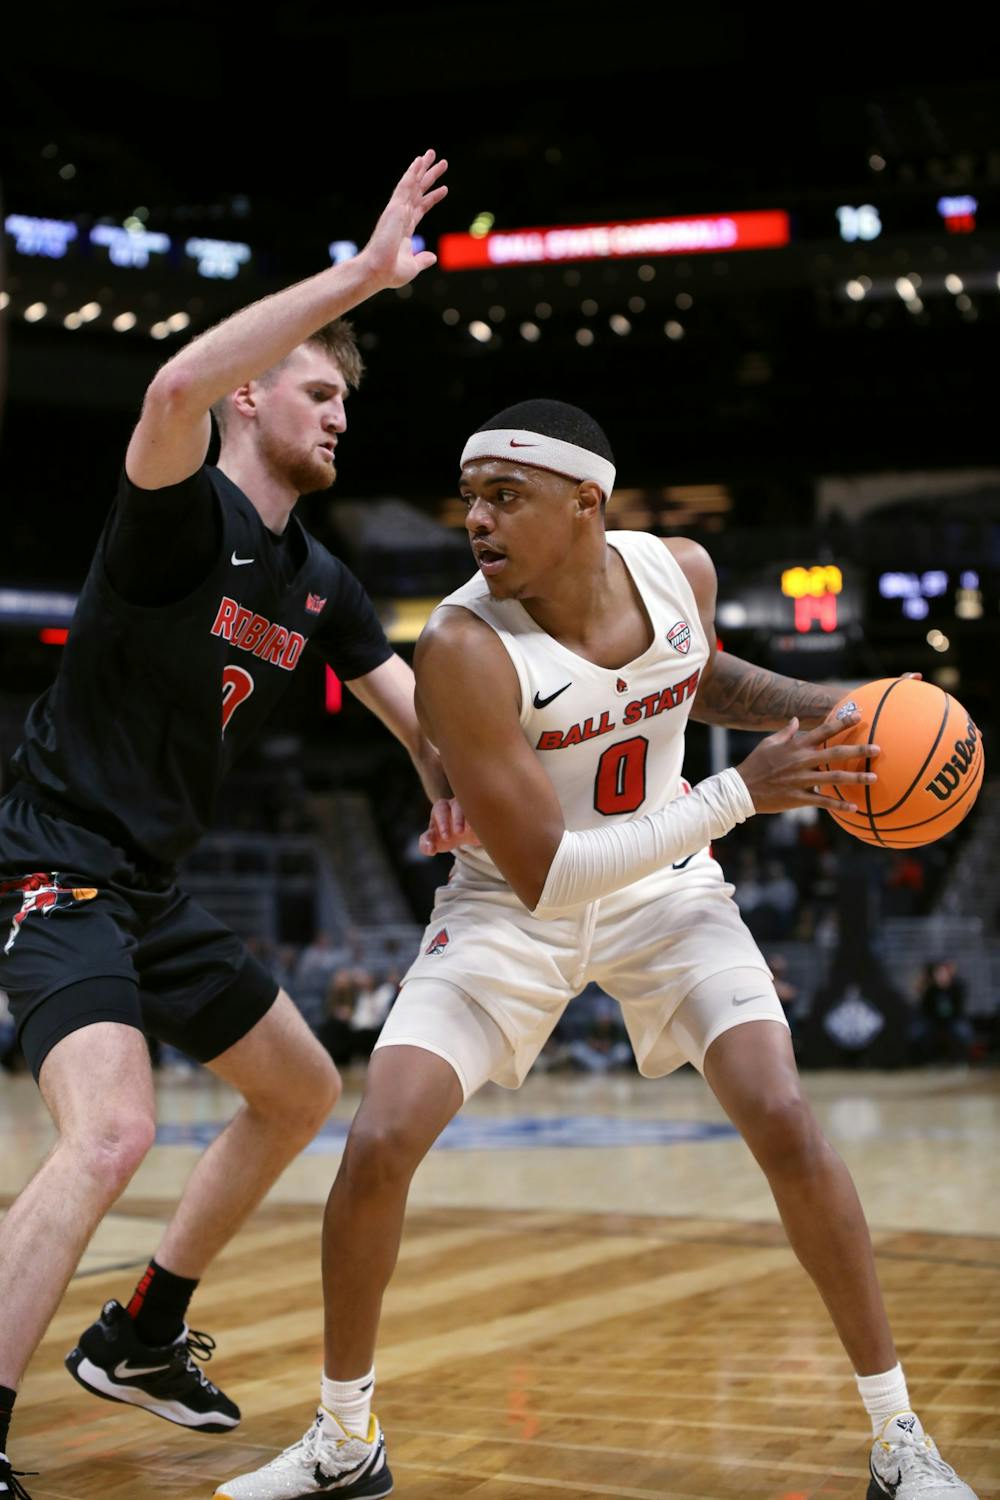 Redshirt junior guard Jarron Coleman looks to pass the ball in a game against Illinois State at the Indy Classic Dec. 17 at Gainbridge Fieldhouse in Indianapolis. Coleman had seven assists during the game. Amber Pietz, DN